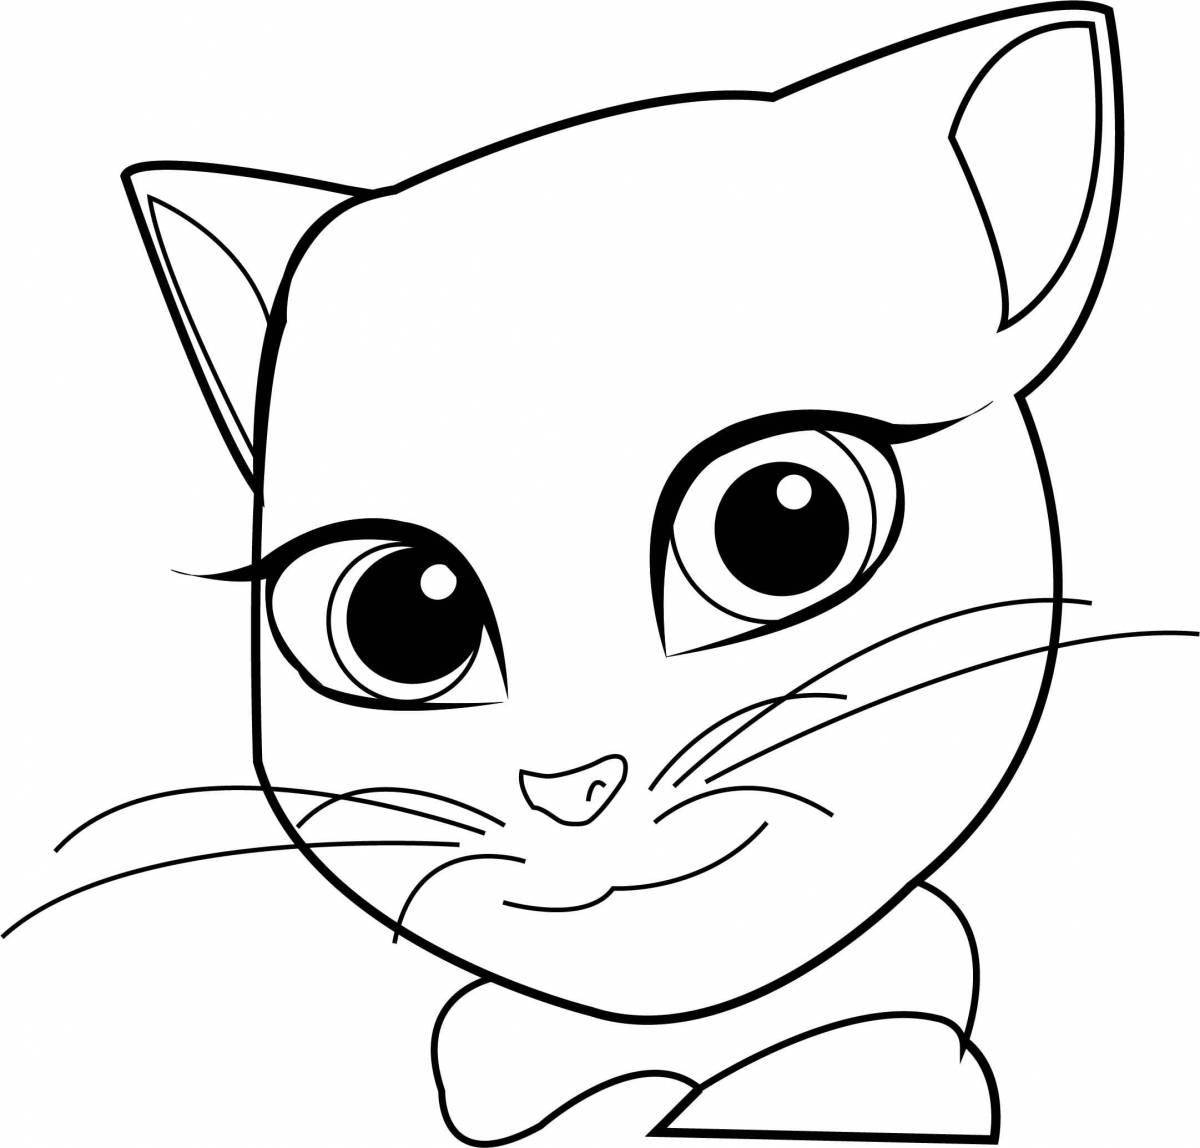 Radiant tom and angela coloring pages